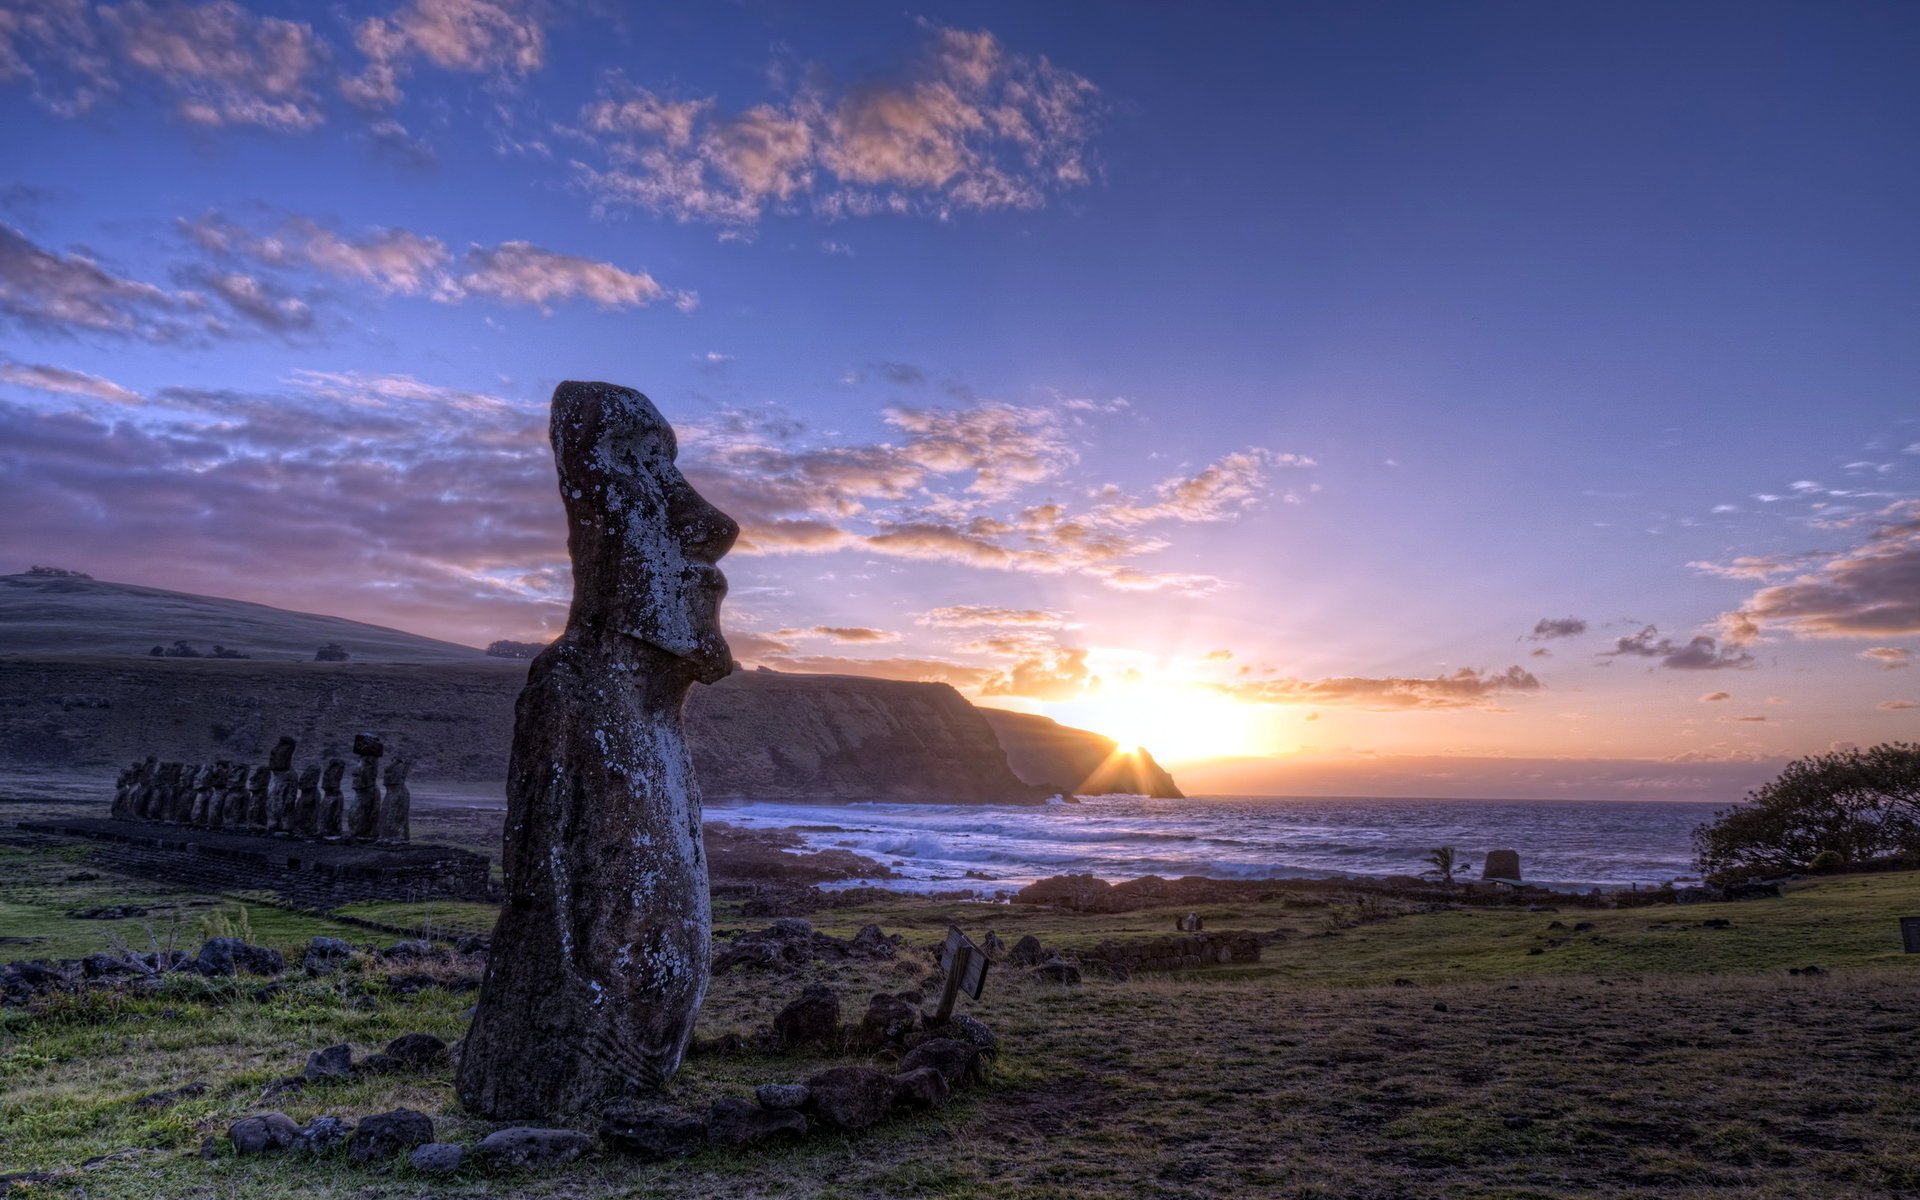 Idols on the island against the sunset